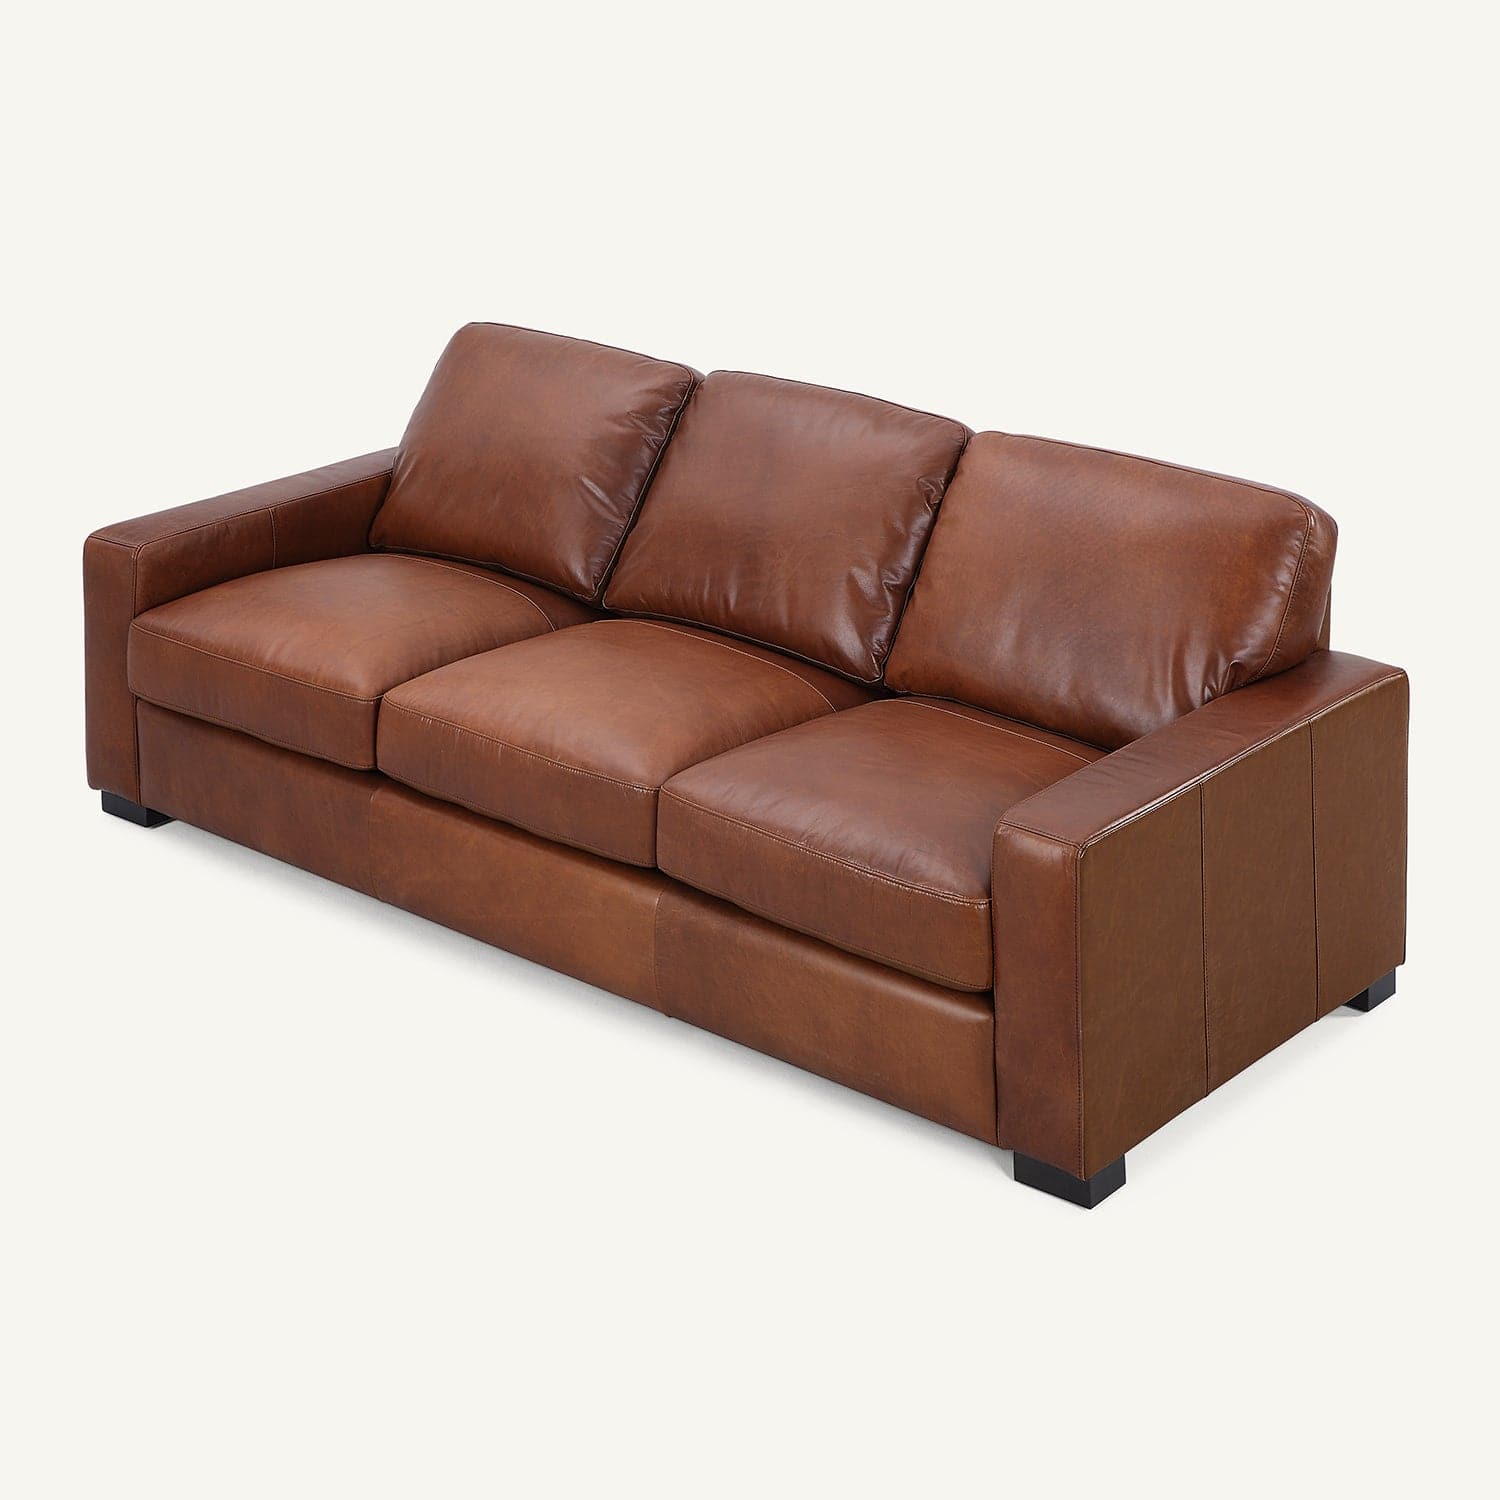 Randall Chestnut Brown Oil Wax Leather 3-Seater Sofa